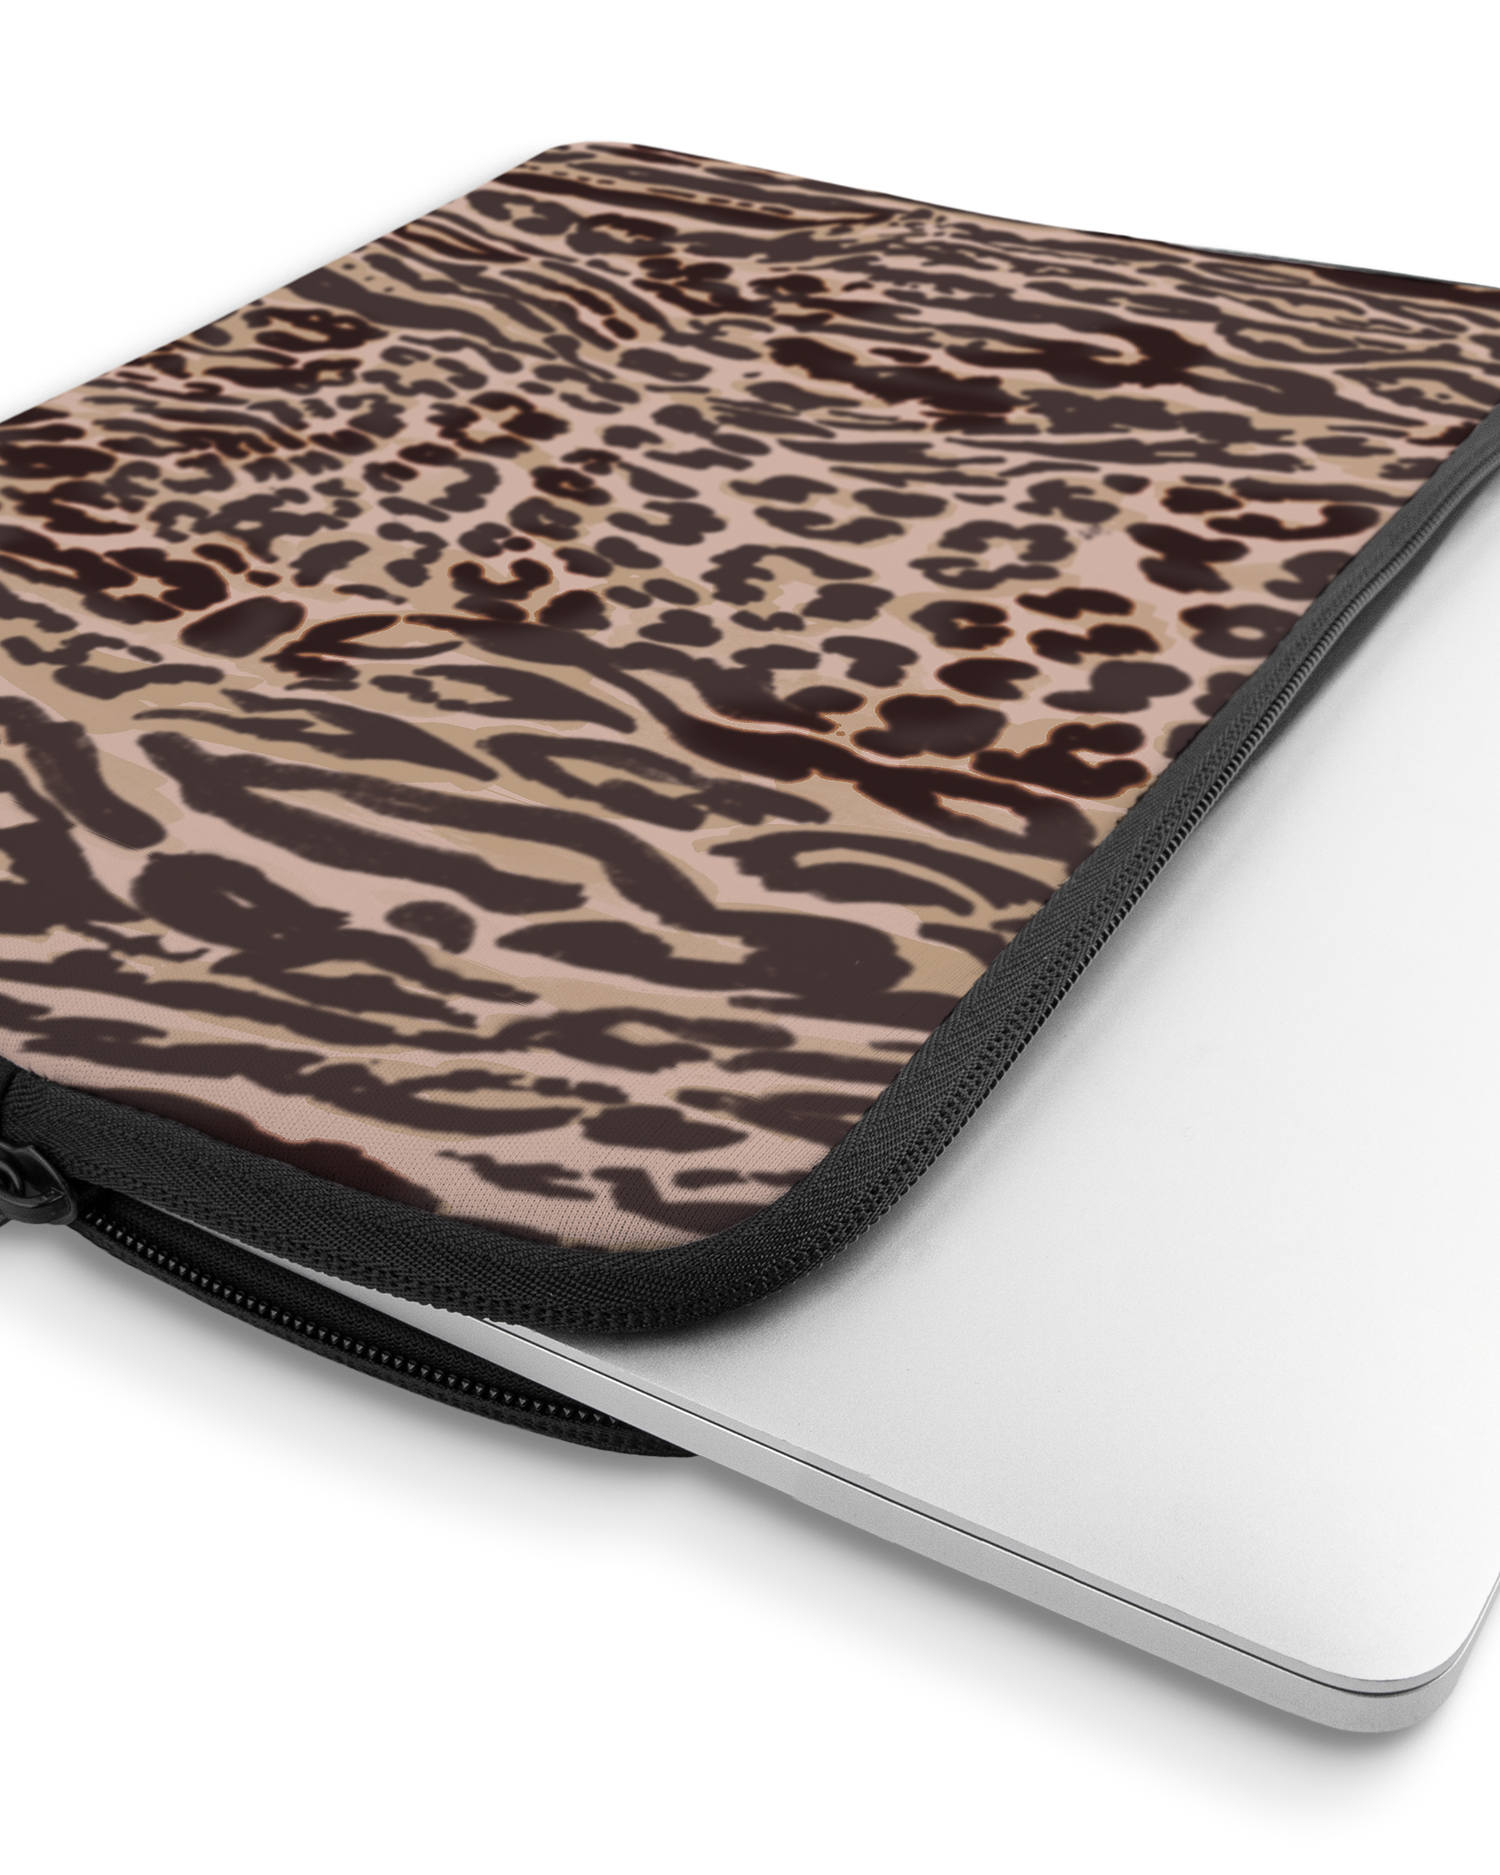 Animal Skin Tough Love Laptop Case 13 inch with device inside